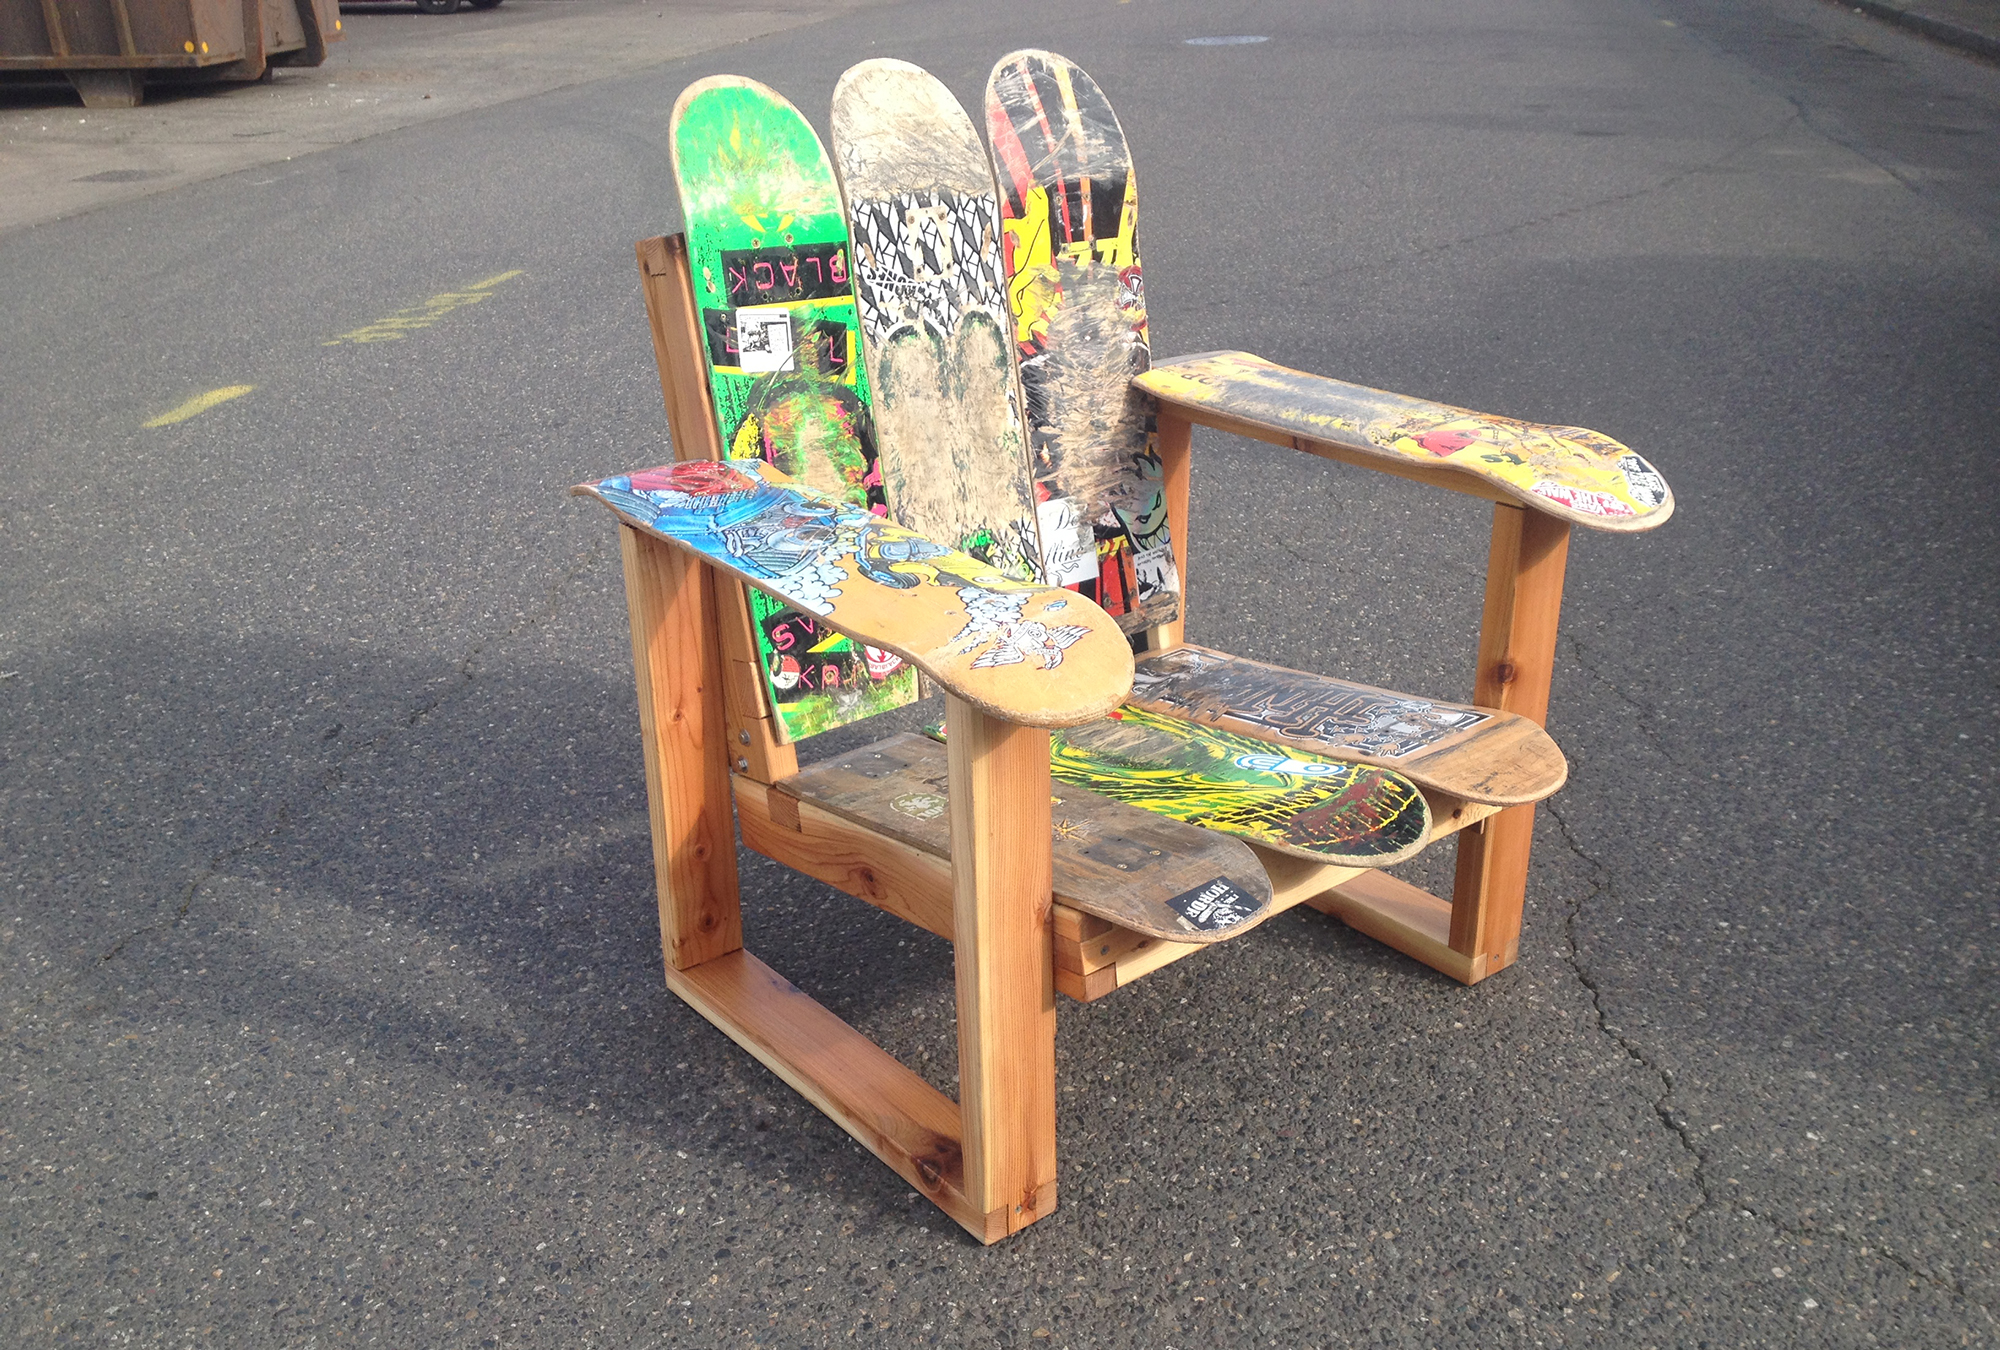 upcycled recycled skateboard chair furniture